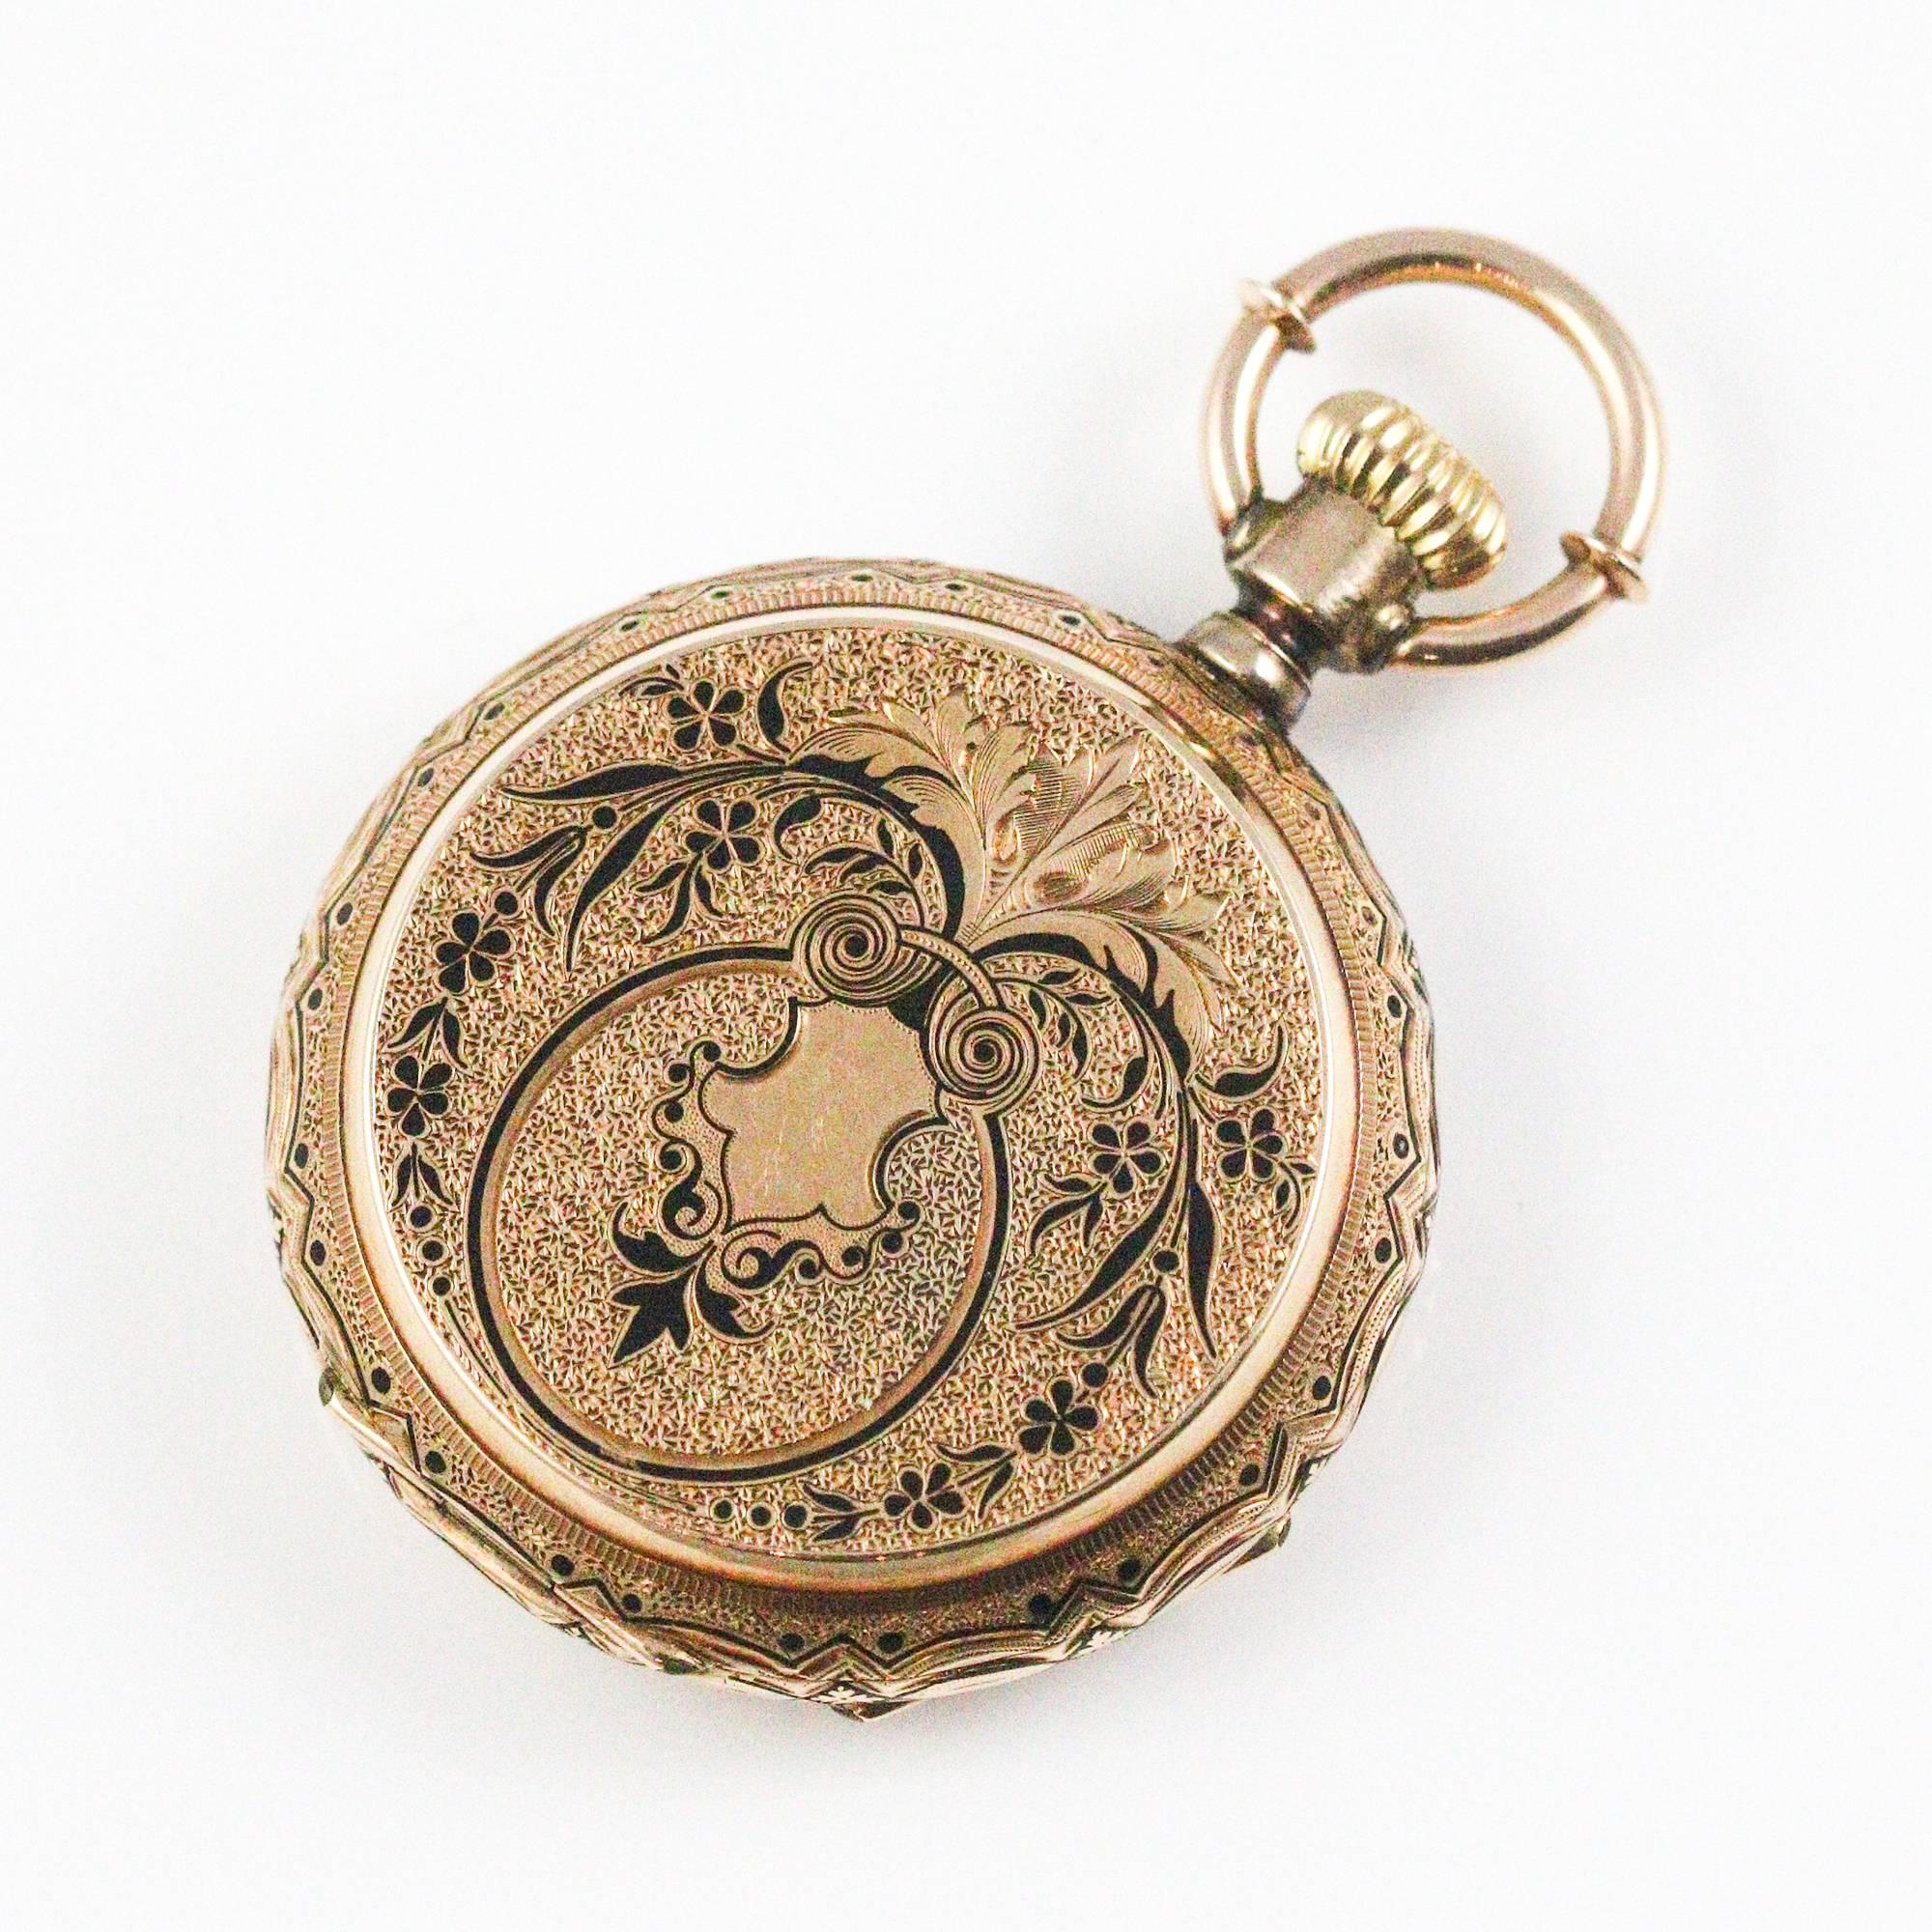 This beautiful Louis Reymond Victorian pocket watch features an intricate black enamel design at all angles of the watch that is in near immaculate condition considering the age of the watch. The watch features a wolf teeth movement with a porcelain